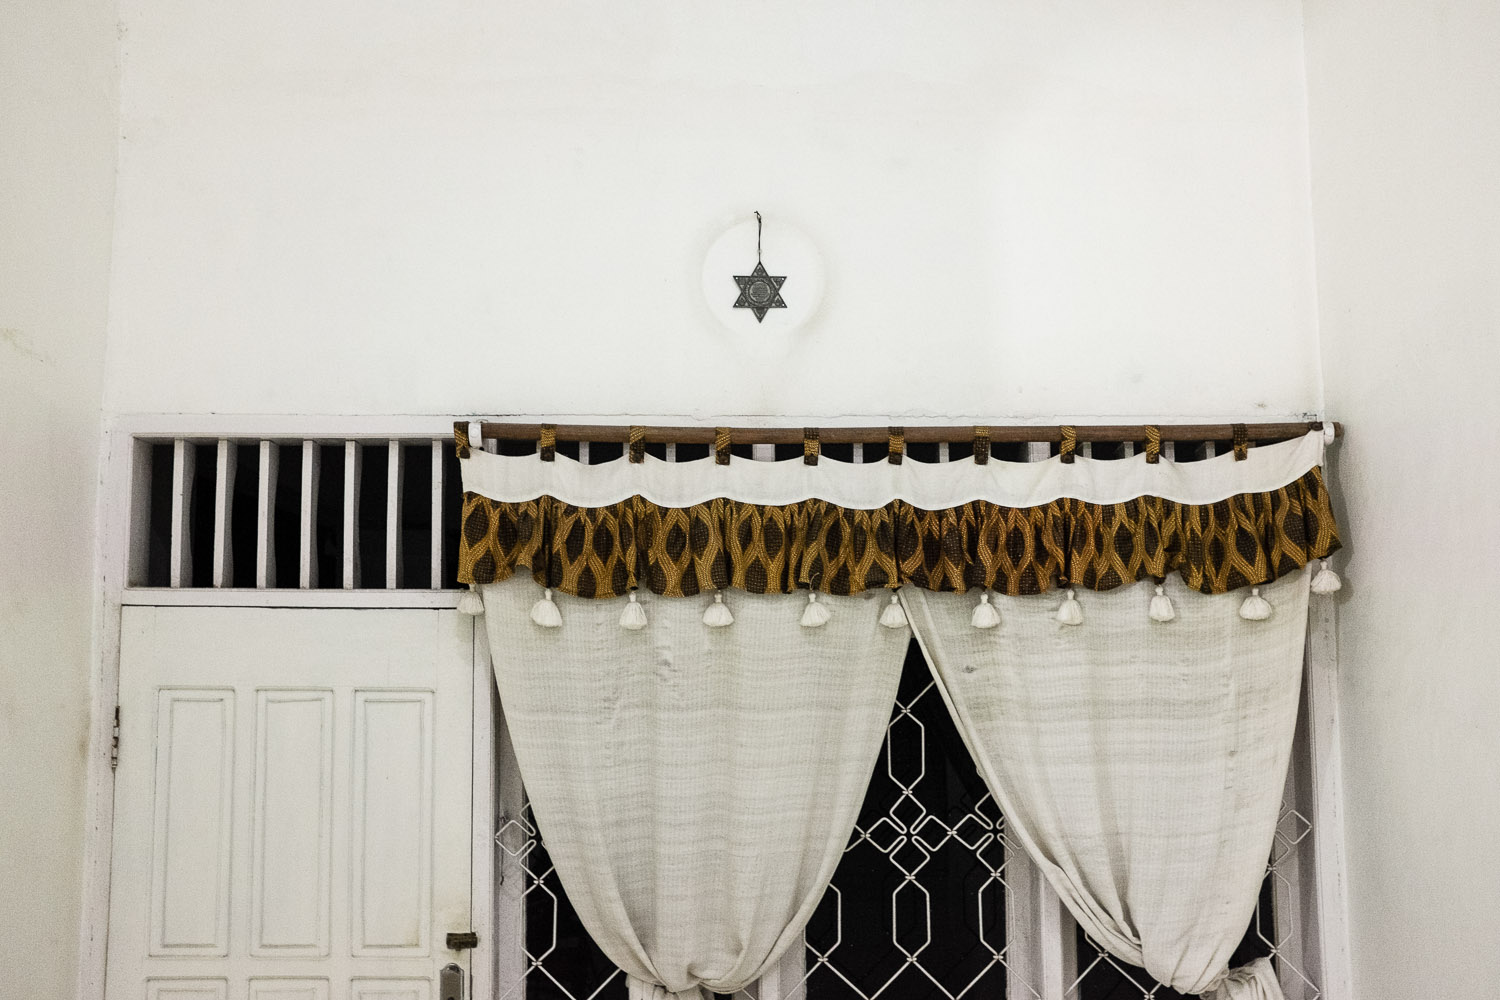   Reginal Tanalisan's house in Manado. He is an integral part of another Jewish group in Manado that is suspected of still having ties to the Church, although he continuously denies this fact and proudly displays Jewish elements and decorations in hi